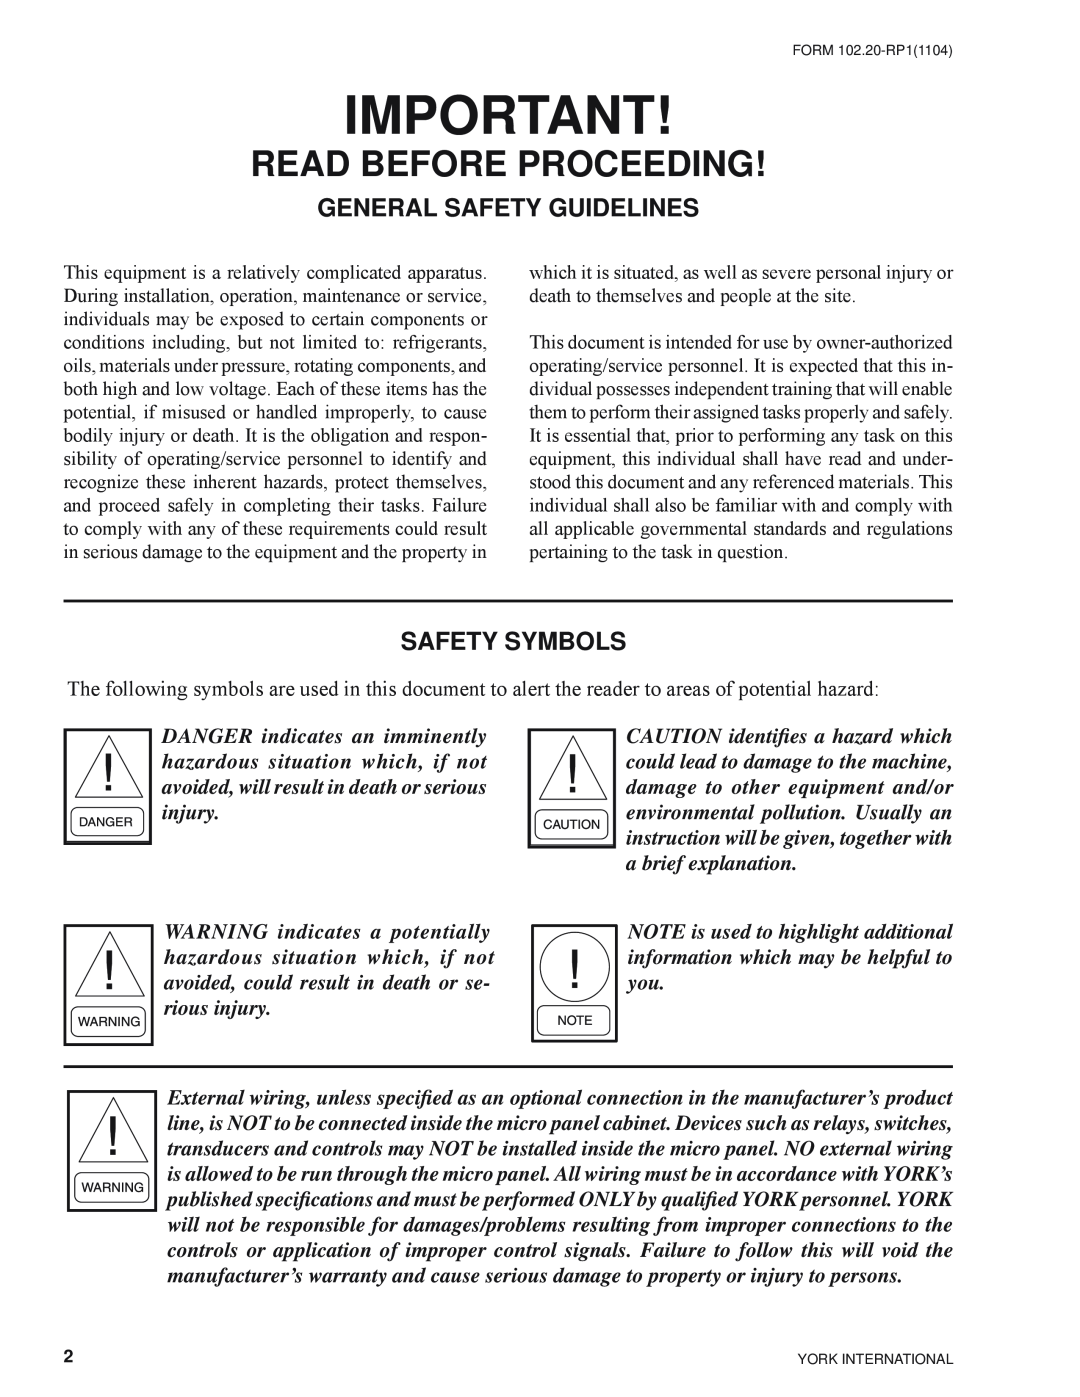 York LDO9688, LDO9624 manual General Safety Guidelines, Safety Symbols, Read Before Proceeding 